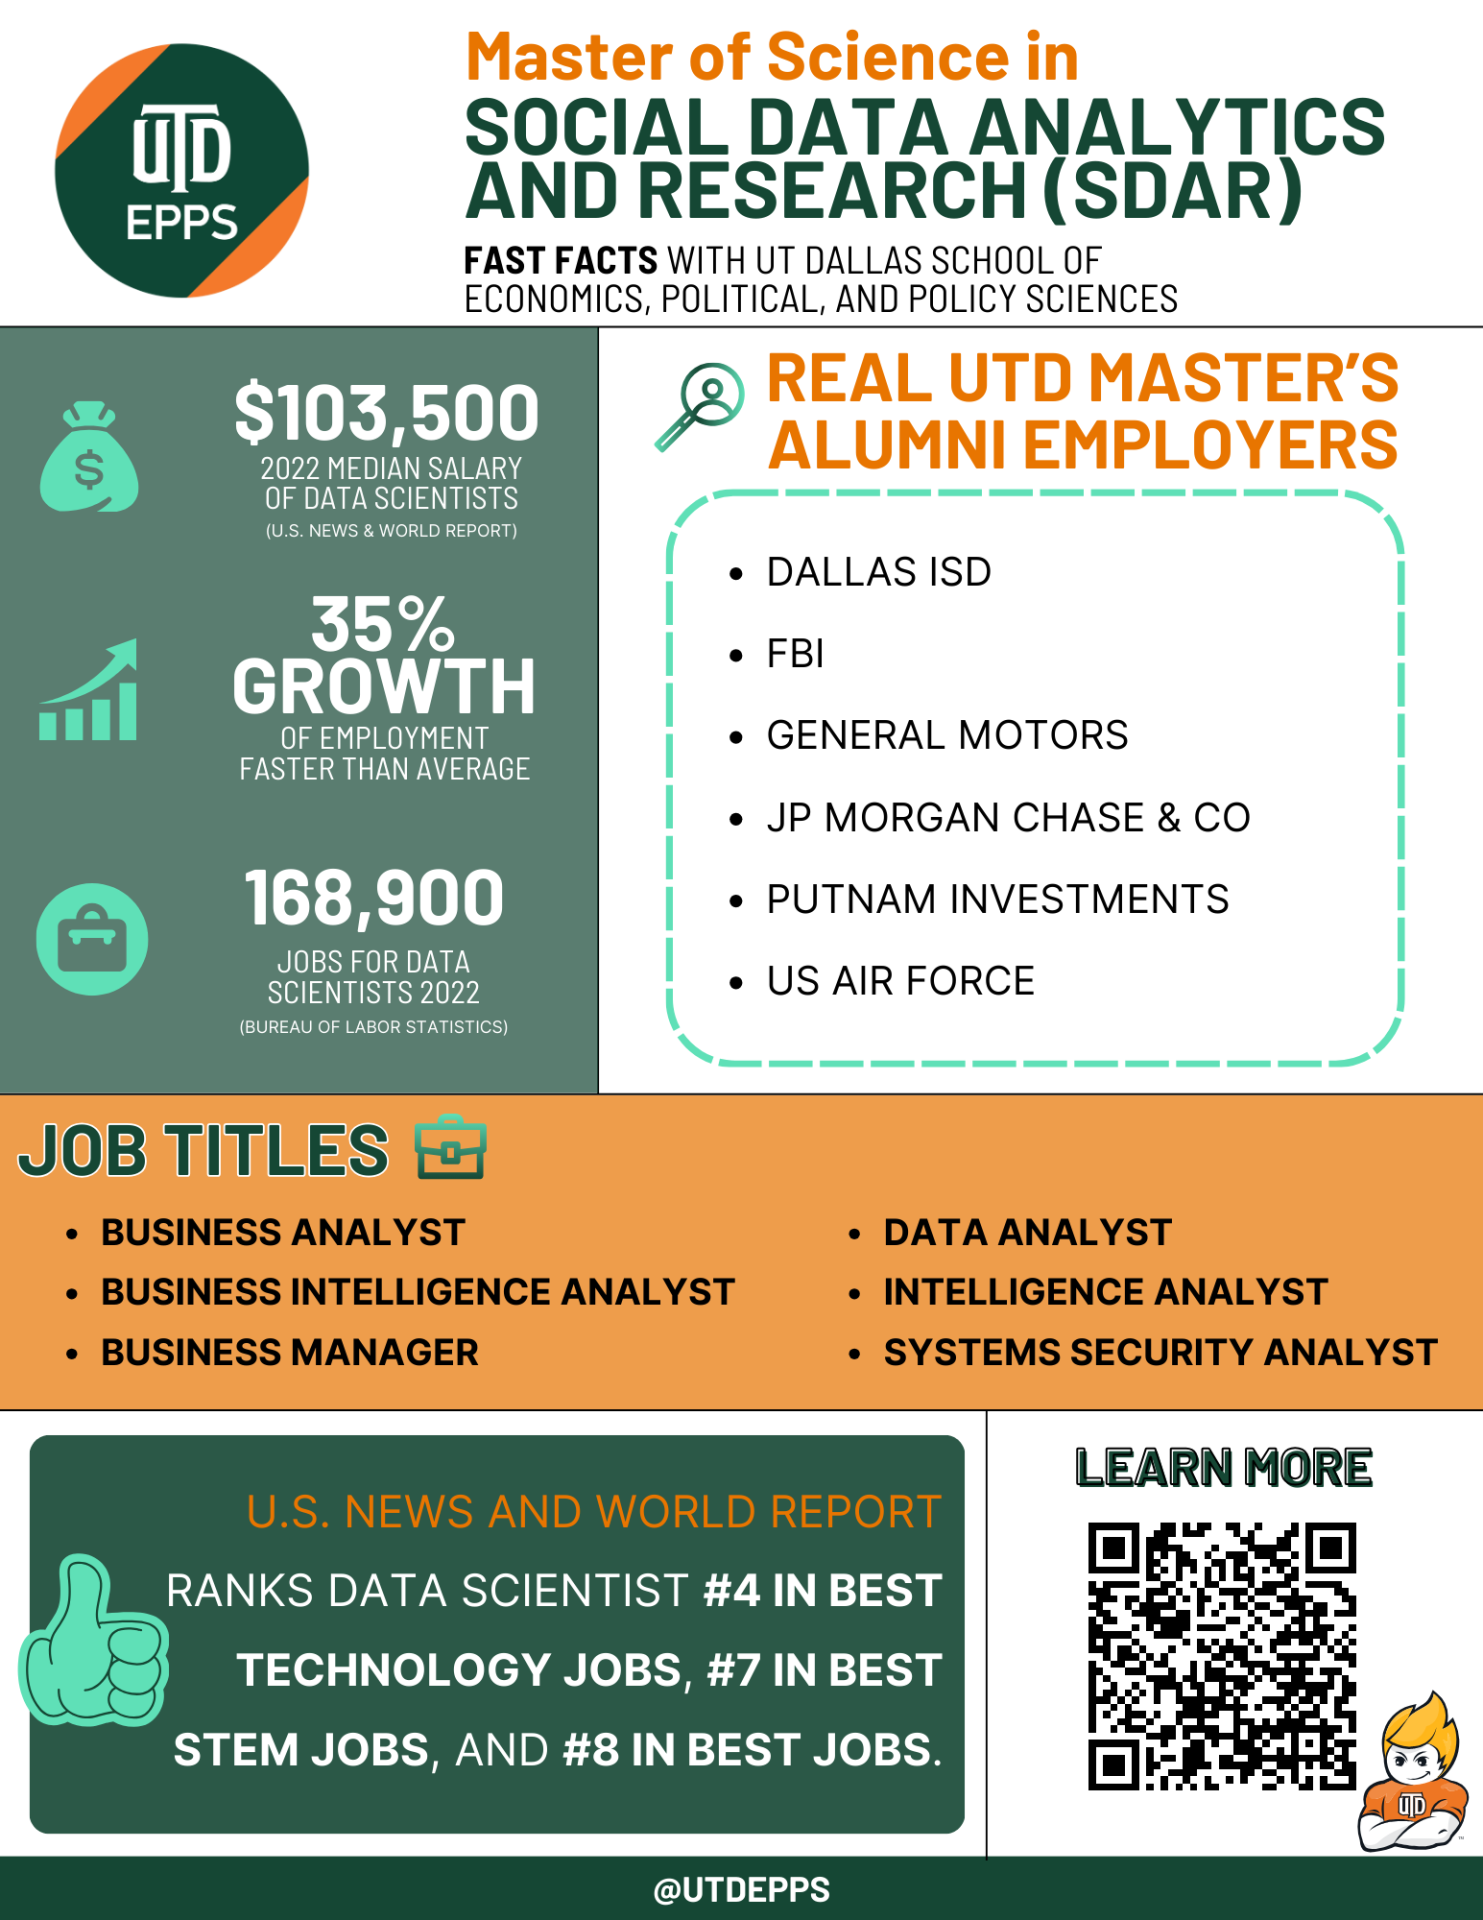 Master of Science in
Social Data Analytics and Research (SDAR). Fast Facts with Ut dallas school of economics, political, and policy sciences.

REAL UTD MASTER’S ALUMNI EMPLOYERS include:
Dallas ISD
FBI
General Motors
JP Morgan Chase & Co
Putnam Investments
US Air Force

Job titles include:
Business Analyst
Business Intelligence Analyst
Business Manager
(BUREAU OF LABOR STATISTICS)
LEARN MORE
Data Analyst
Intelligence Analyst
Systems Security Analyst

3,500 is the 2022 Median Salary of data scientists. 35% Growth OF EMPLOYMENT which is faster than average. 
168,900 Jobs for data scientists in 2022. Data is from U.S. News & World Report.

U.S. News and World Report ranks data scientist #4 in Best Technology Jobs, #7 in Best STEM Jobs, and #8 in Best Jobs.

Learn more by scanning the QR code.

@UTDEPPS 